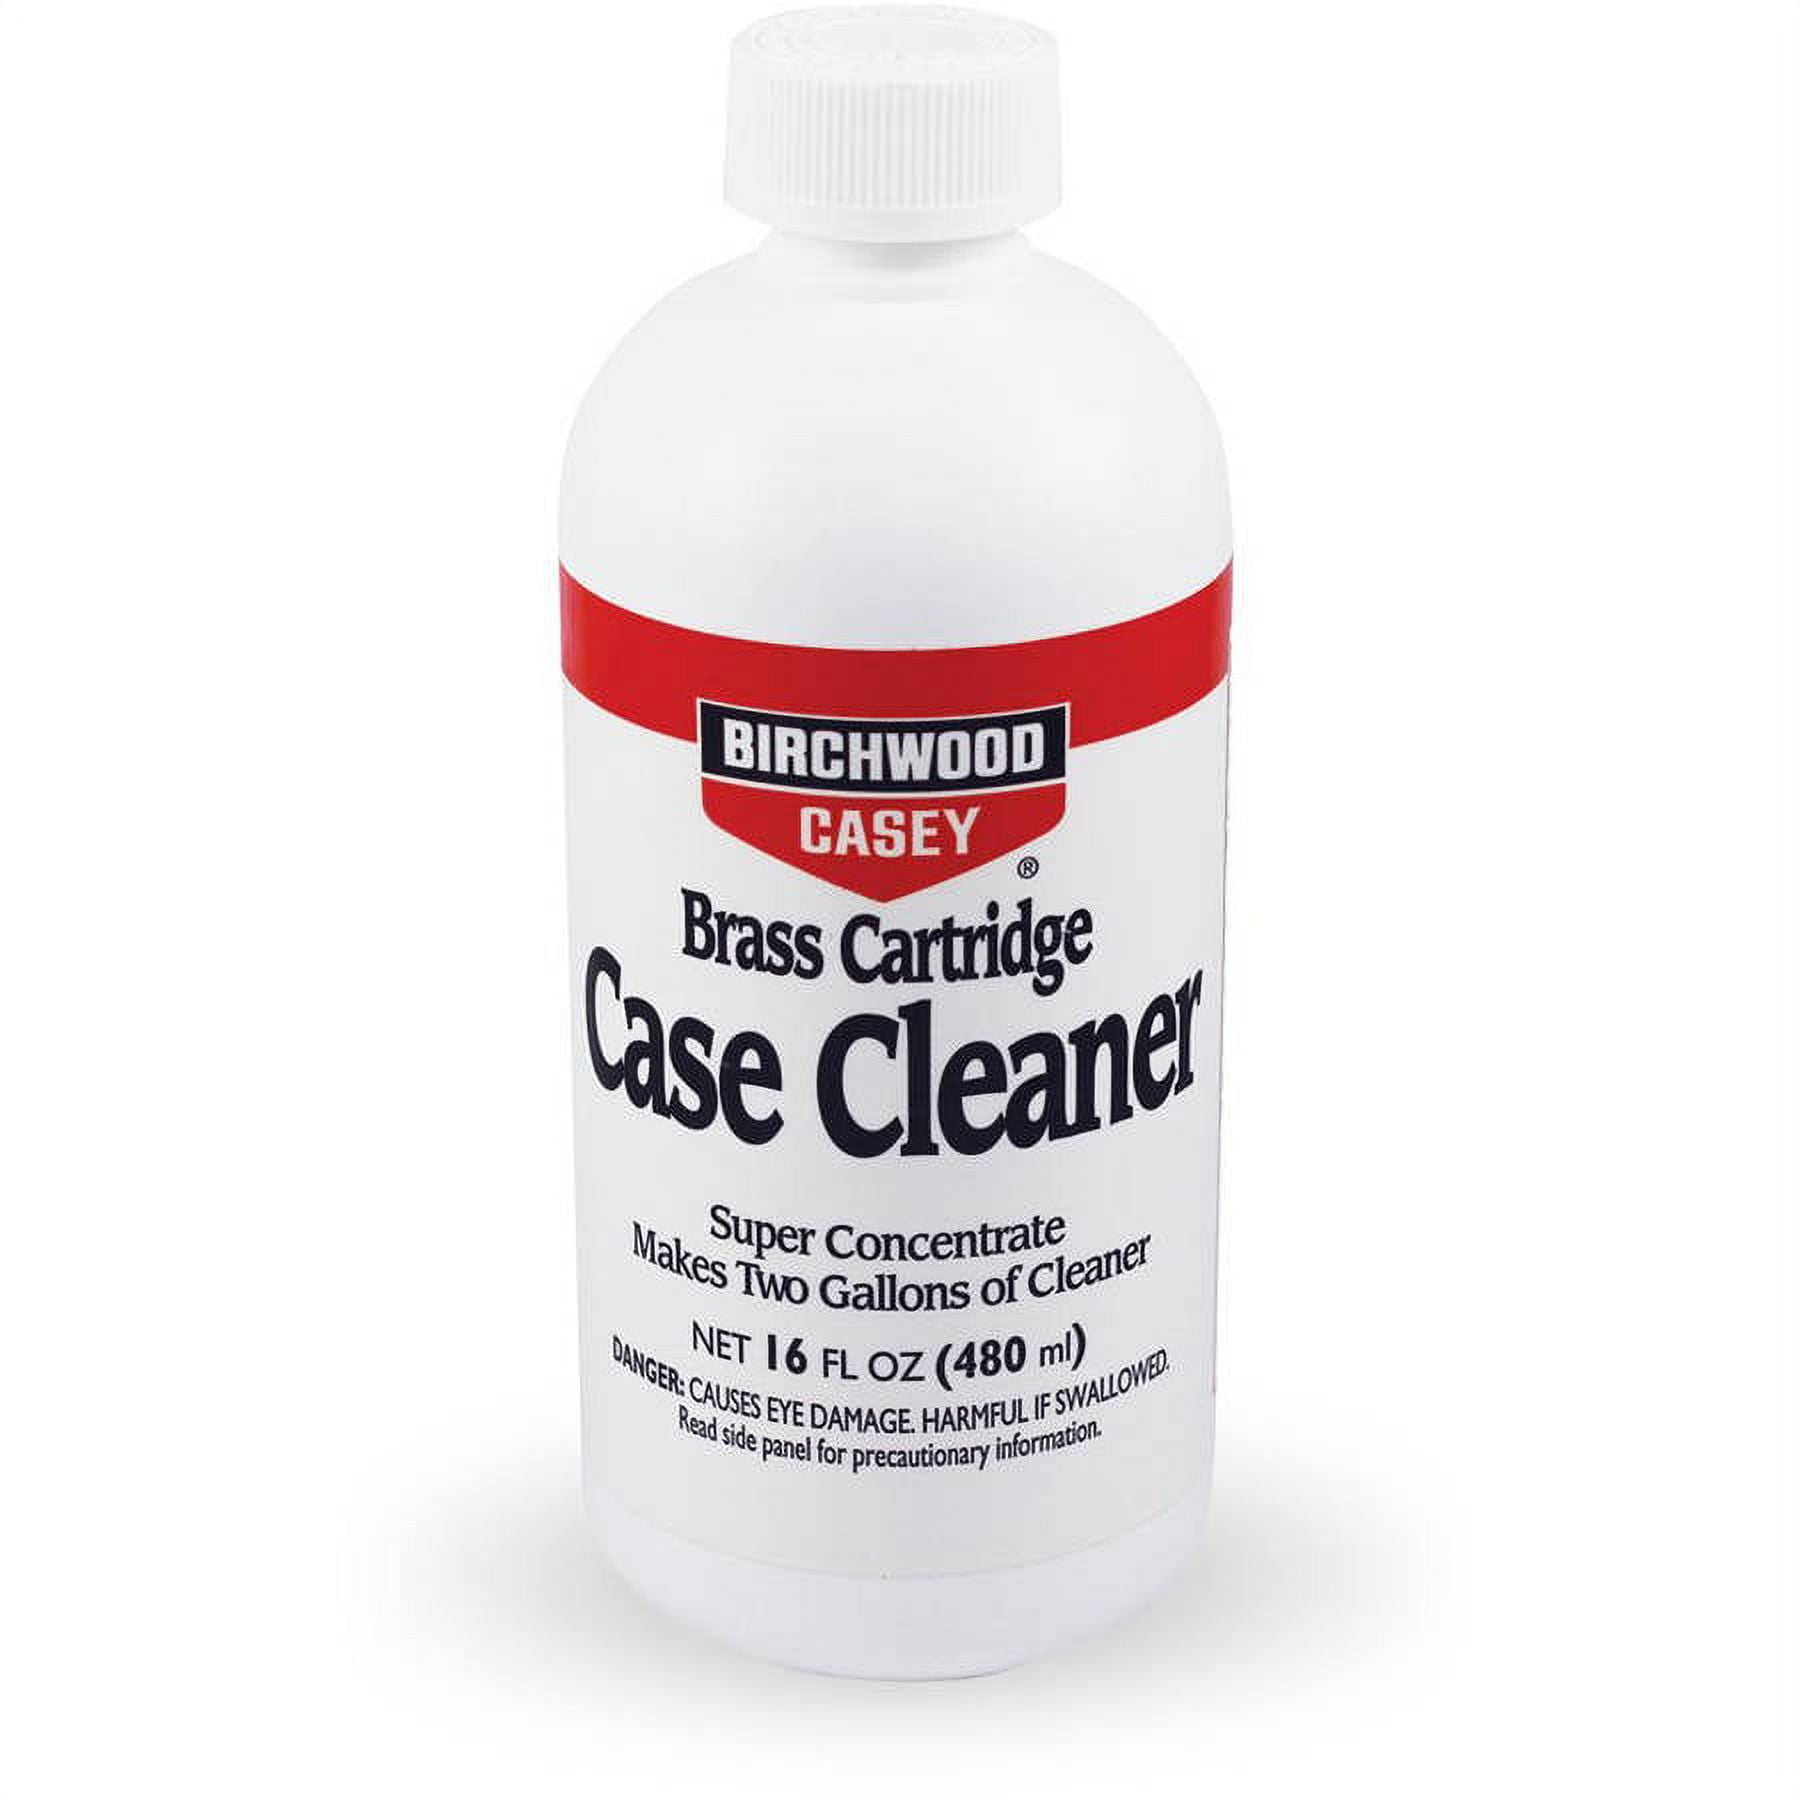 BIRCHWOOD CASEY BRASS CASE CLEANER CONCENTRATE 16 OZ 